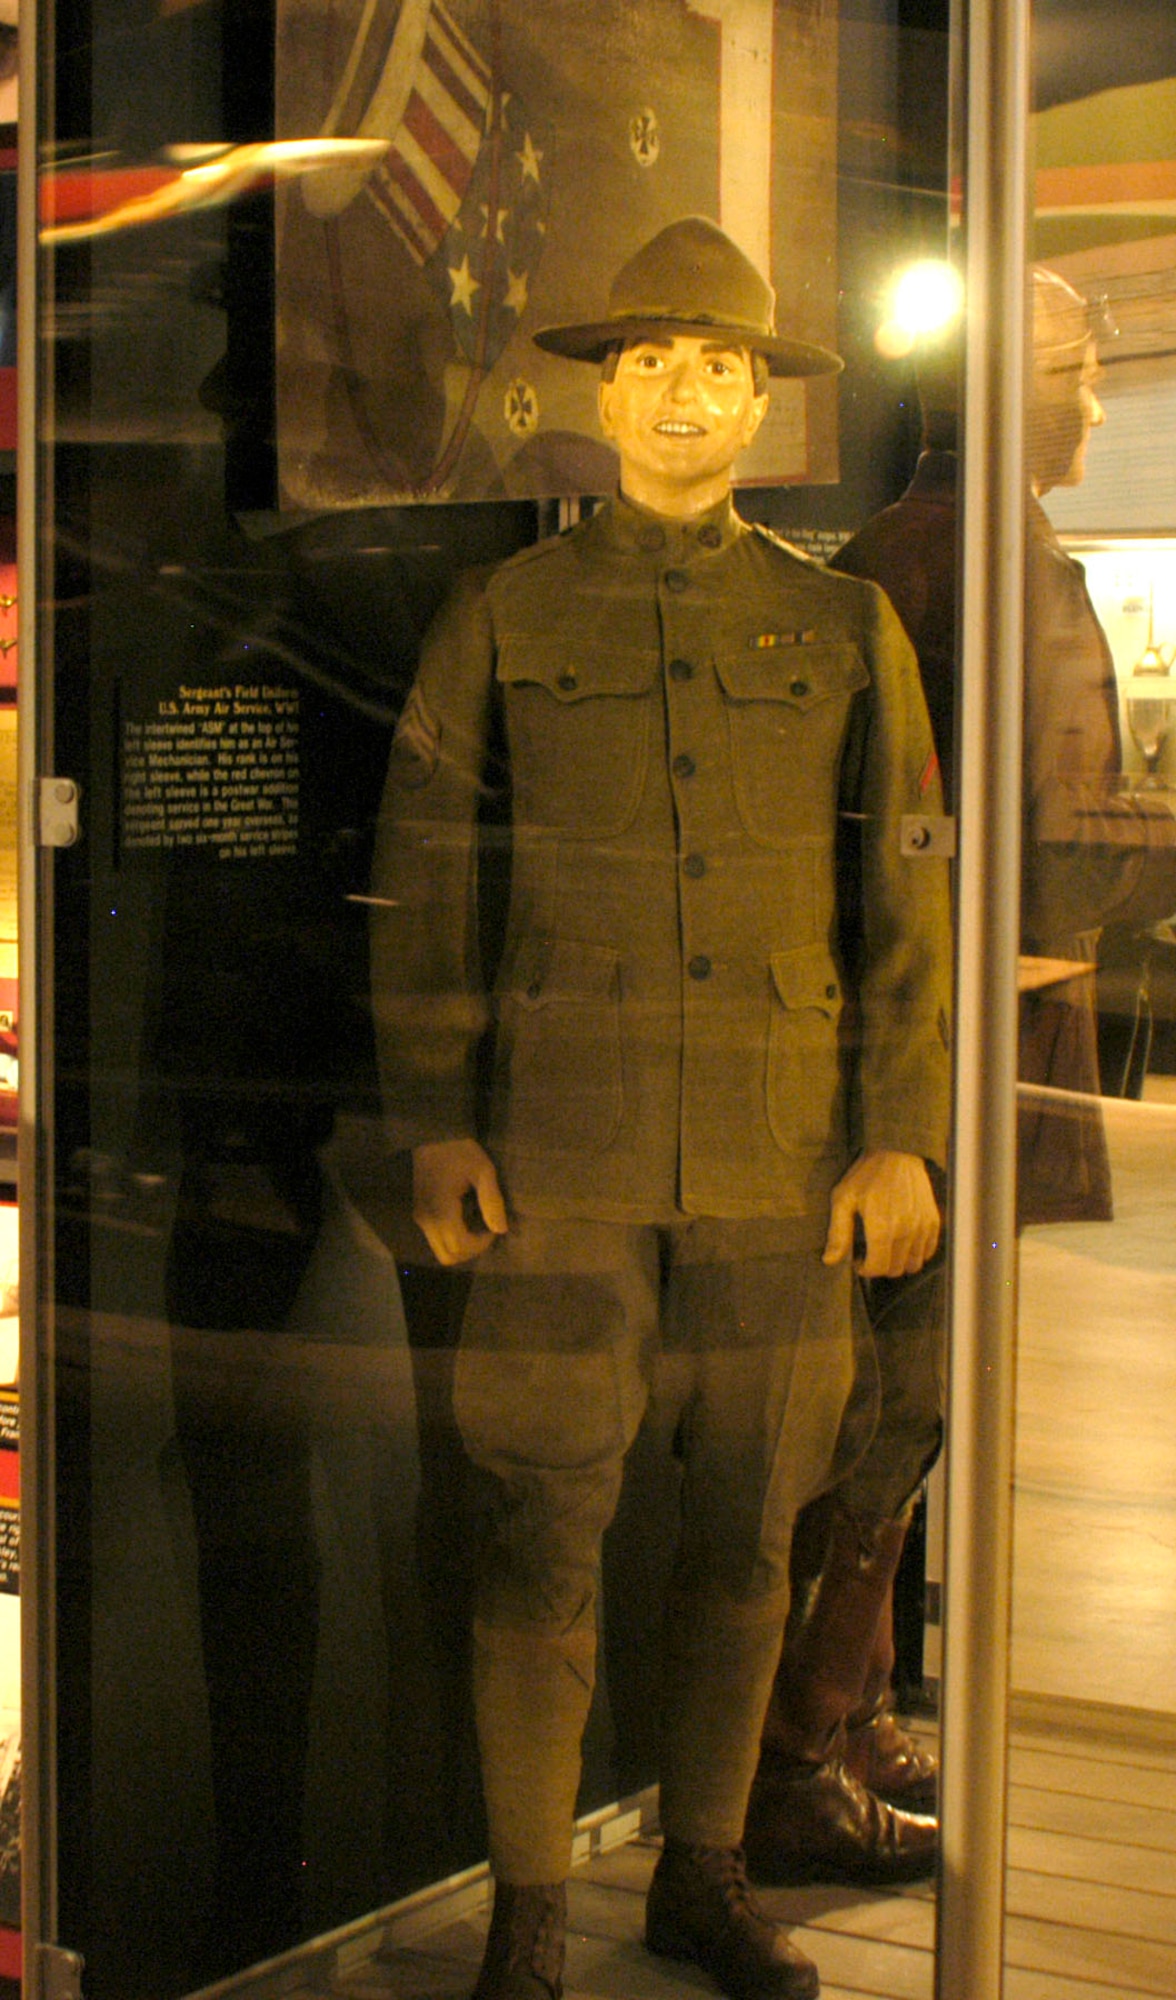 DAYTON, Ohio - Sergeant's Field Uniform, U.S. Army Air Service, World War I, on display in the Early Years Gallery at the National Museum of the U.S. Air Force. (U.S. Air Force photo)